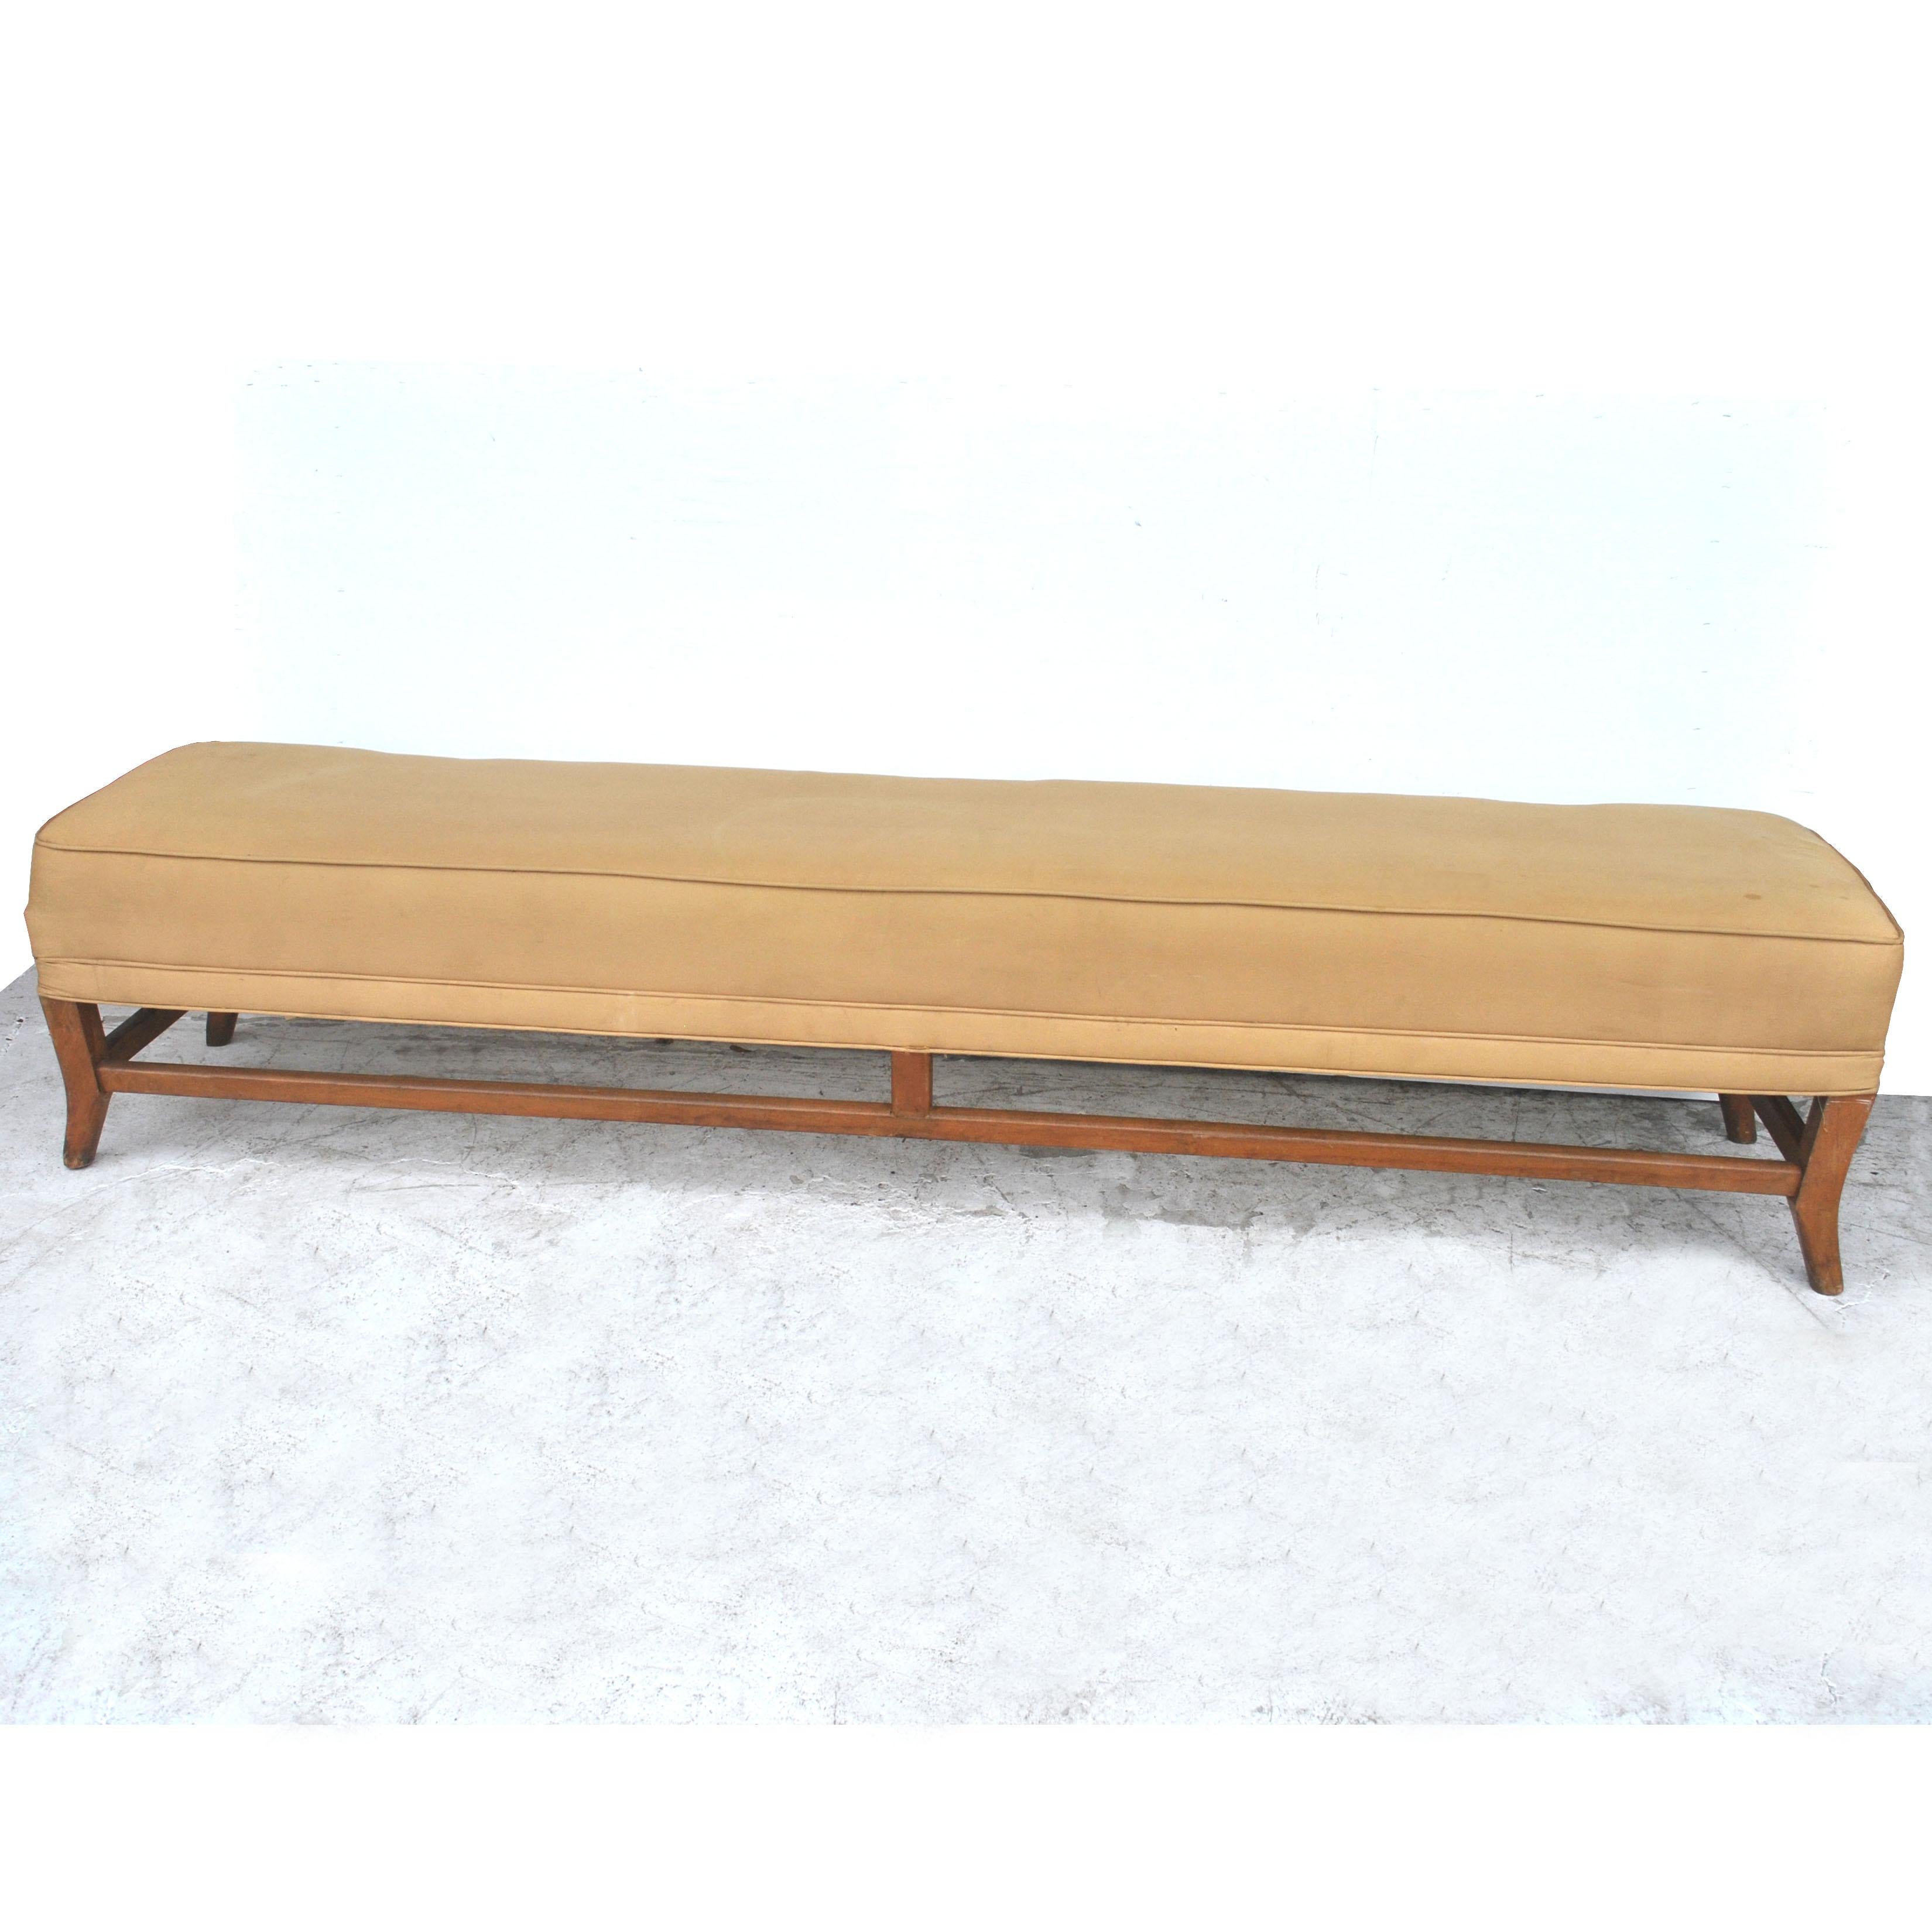  A 7.5 ft mid-century vintage bench upolstered in a silk blend fabric. Walnut frame with splayed legs. 
Reupholstery recommended.